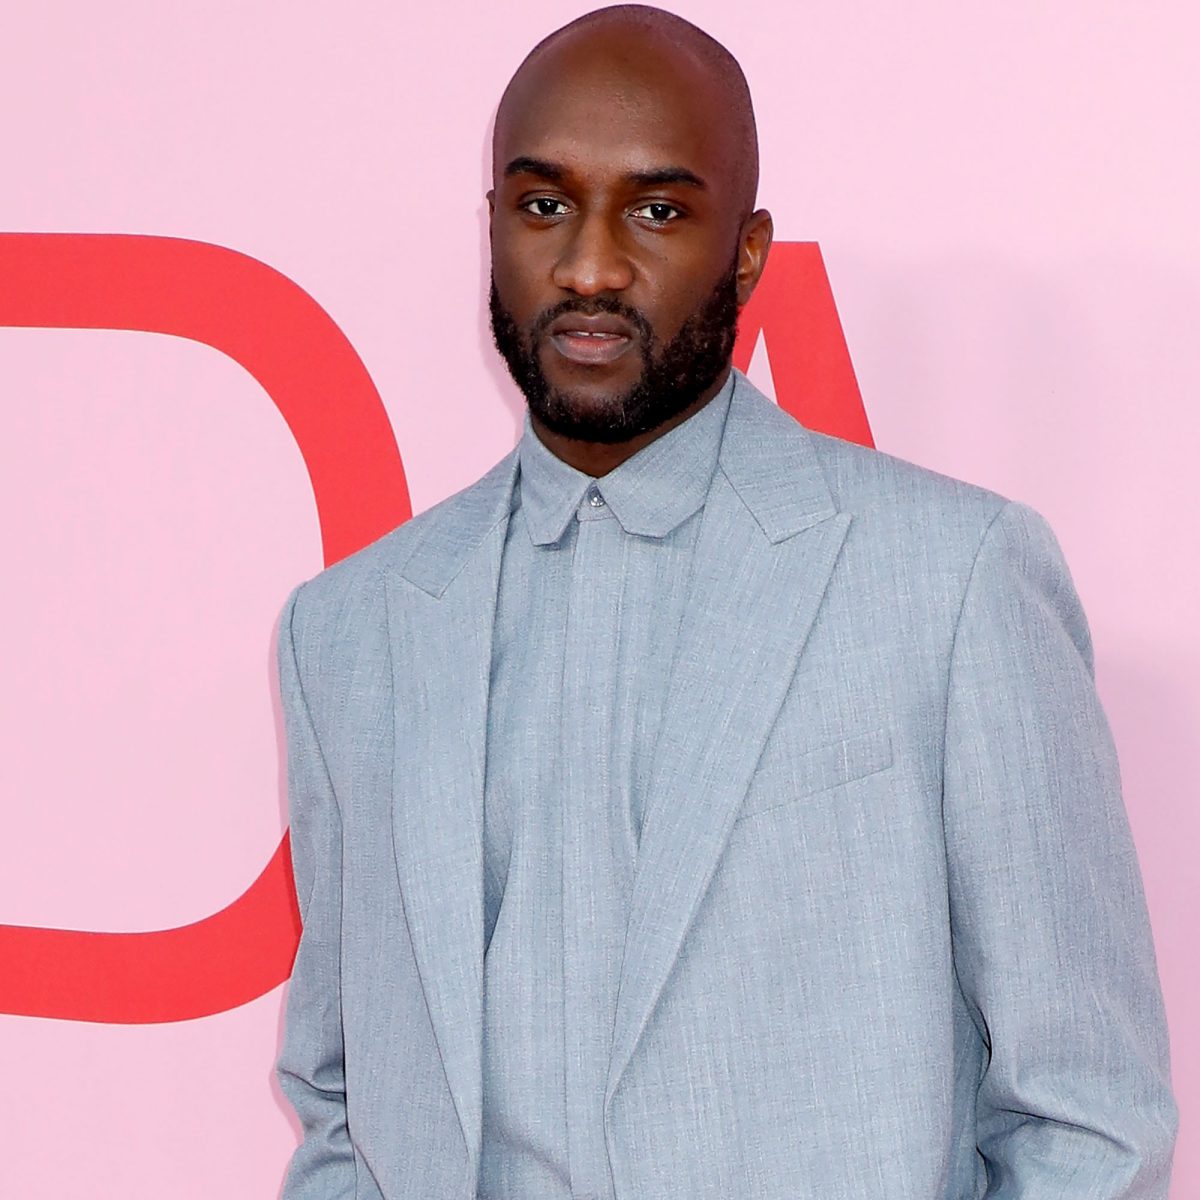 Fashion house Louis Vuitton has hosted the late designer Virgil Abloh's  final runway presentation to “celebrate his legacy” just days after…